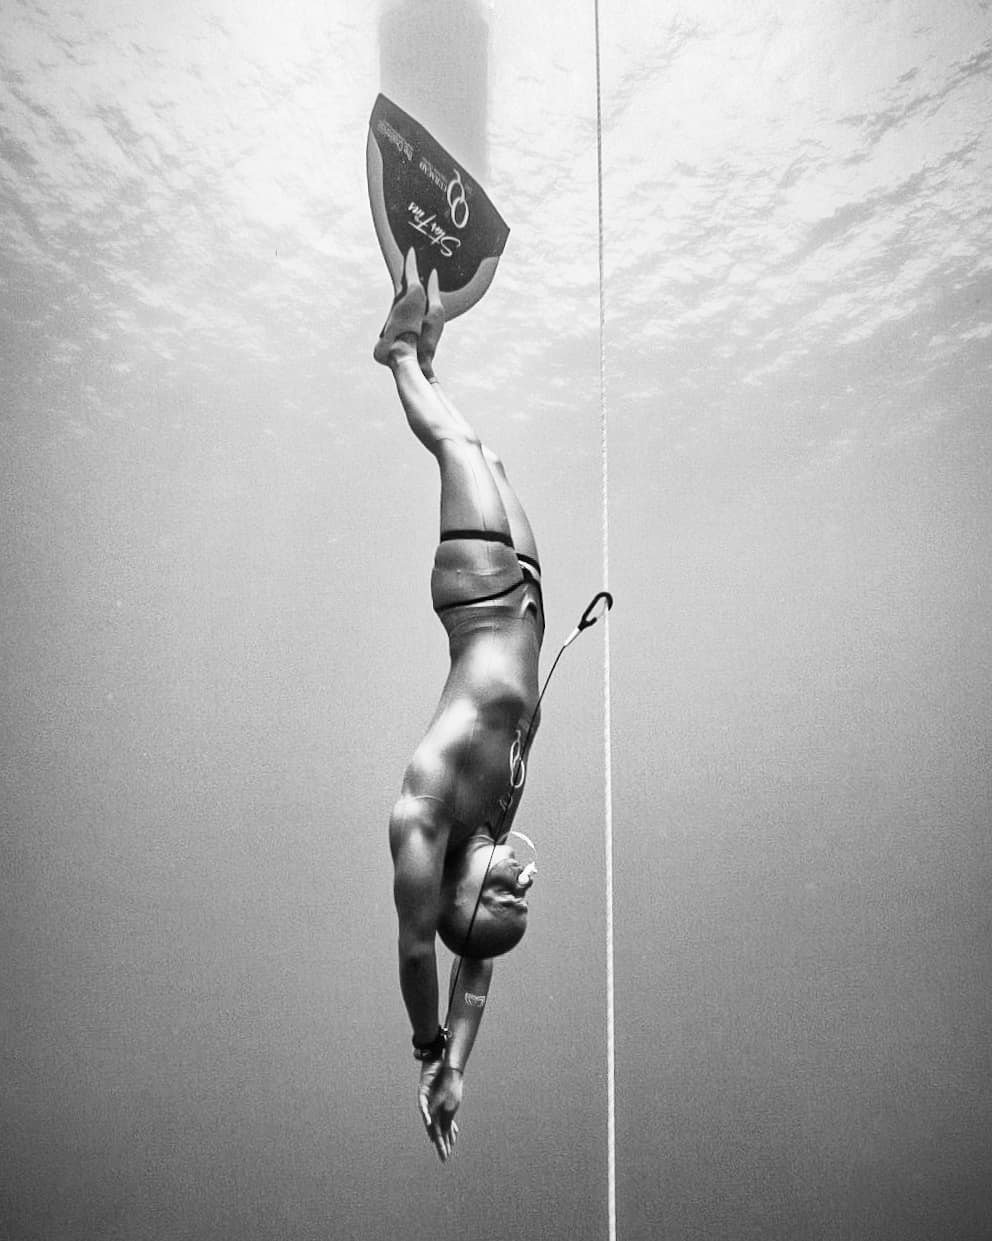 Freediver making a bubble ring